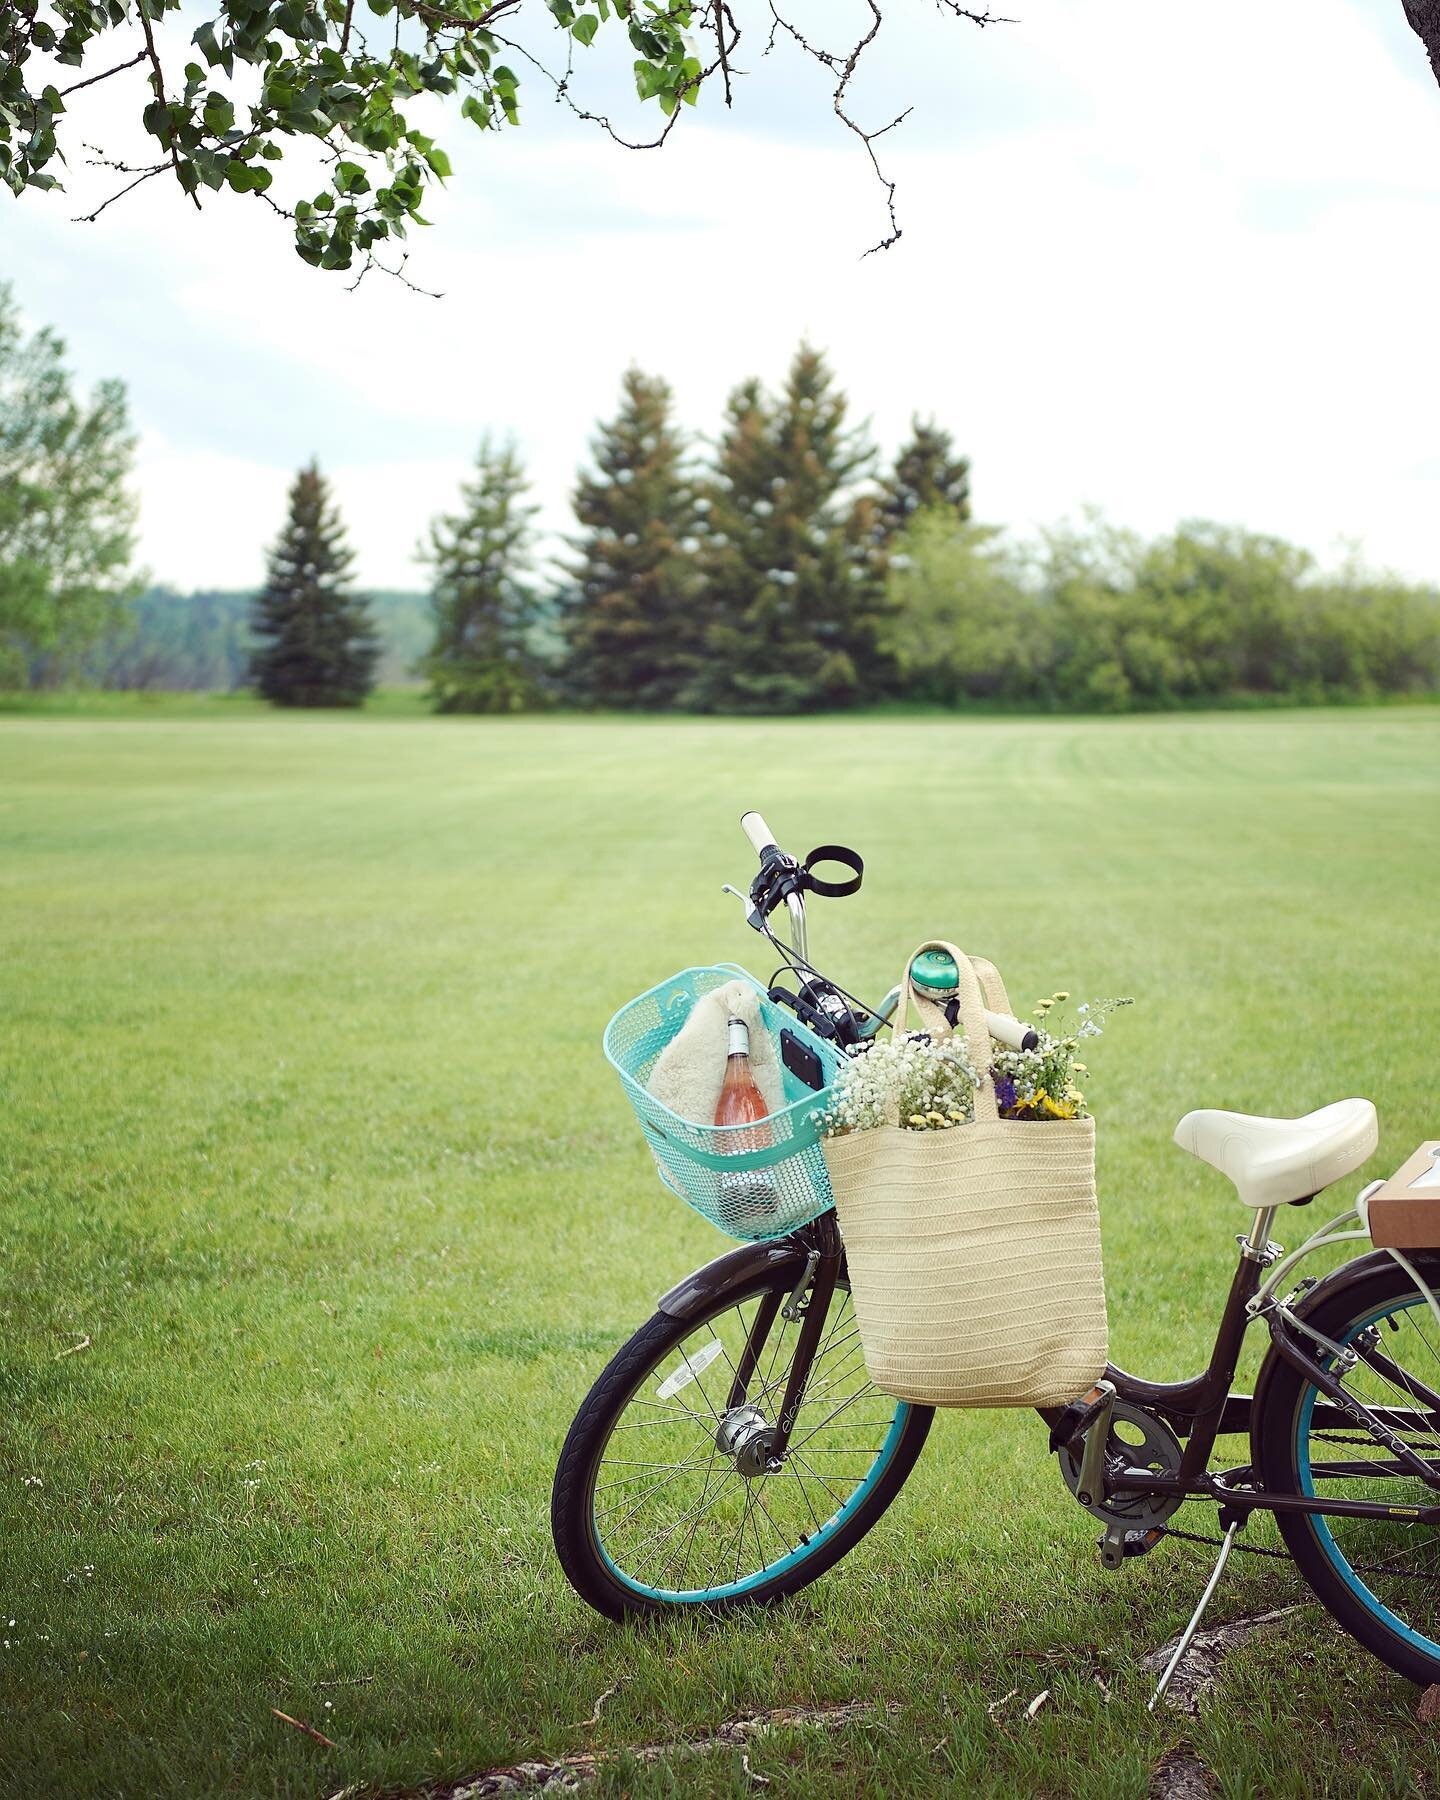 All set for a bike ride to one of our favourite spots for a perfect little picnic in the park. 

#luxurypicnic #yycsmallbusiness #picnicinthepark #popuppicnic #yycevents #calgarypicniccompany #yycengagement #picnicevents #calgaryparks #northglenmorep